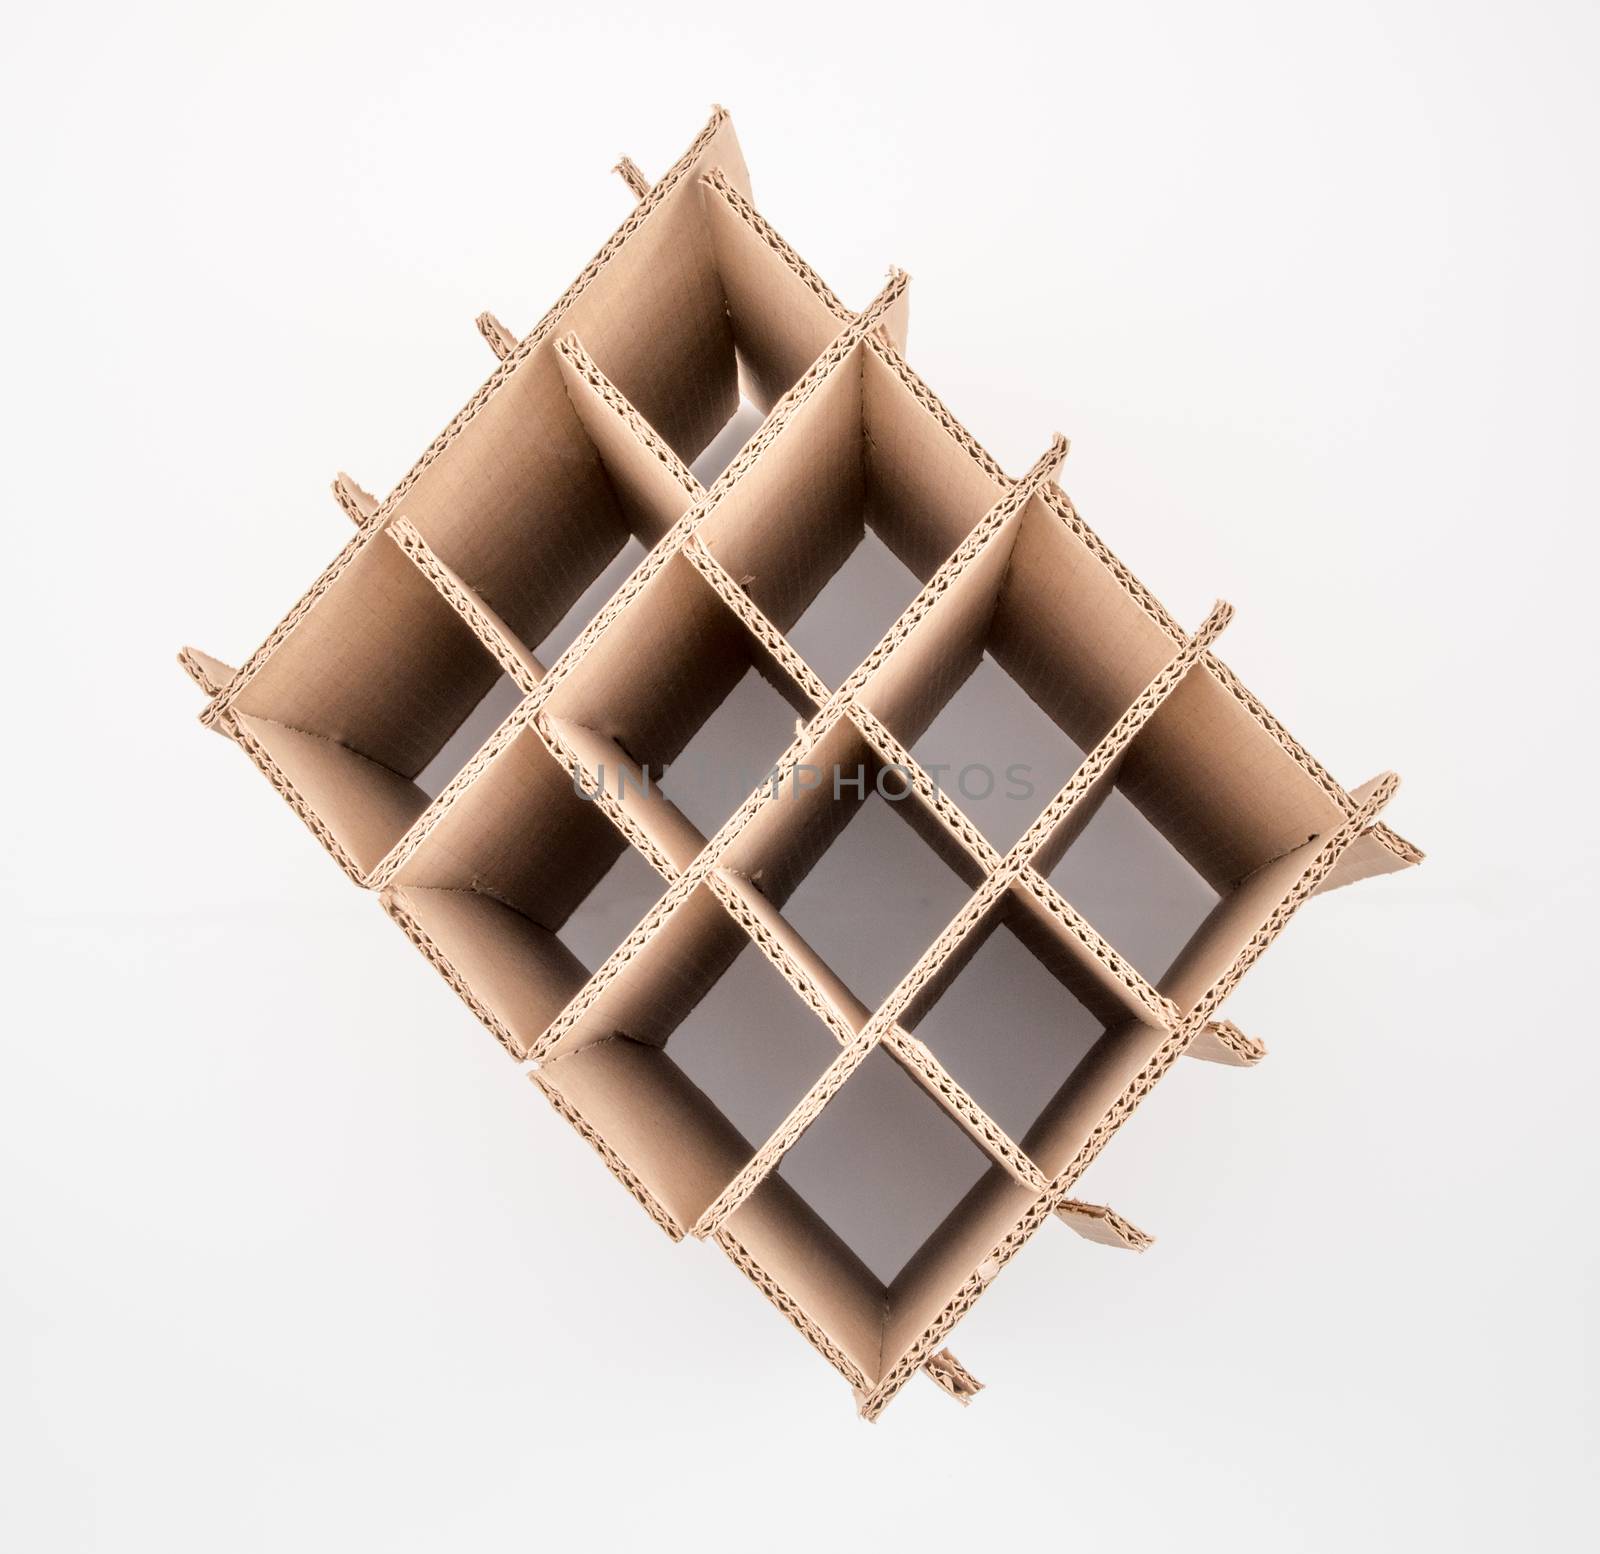 Double-walled corrugated wine box partition on white background